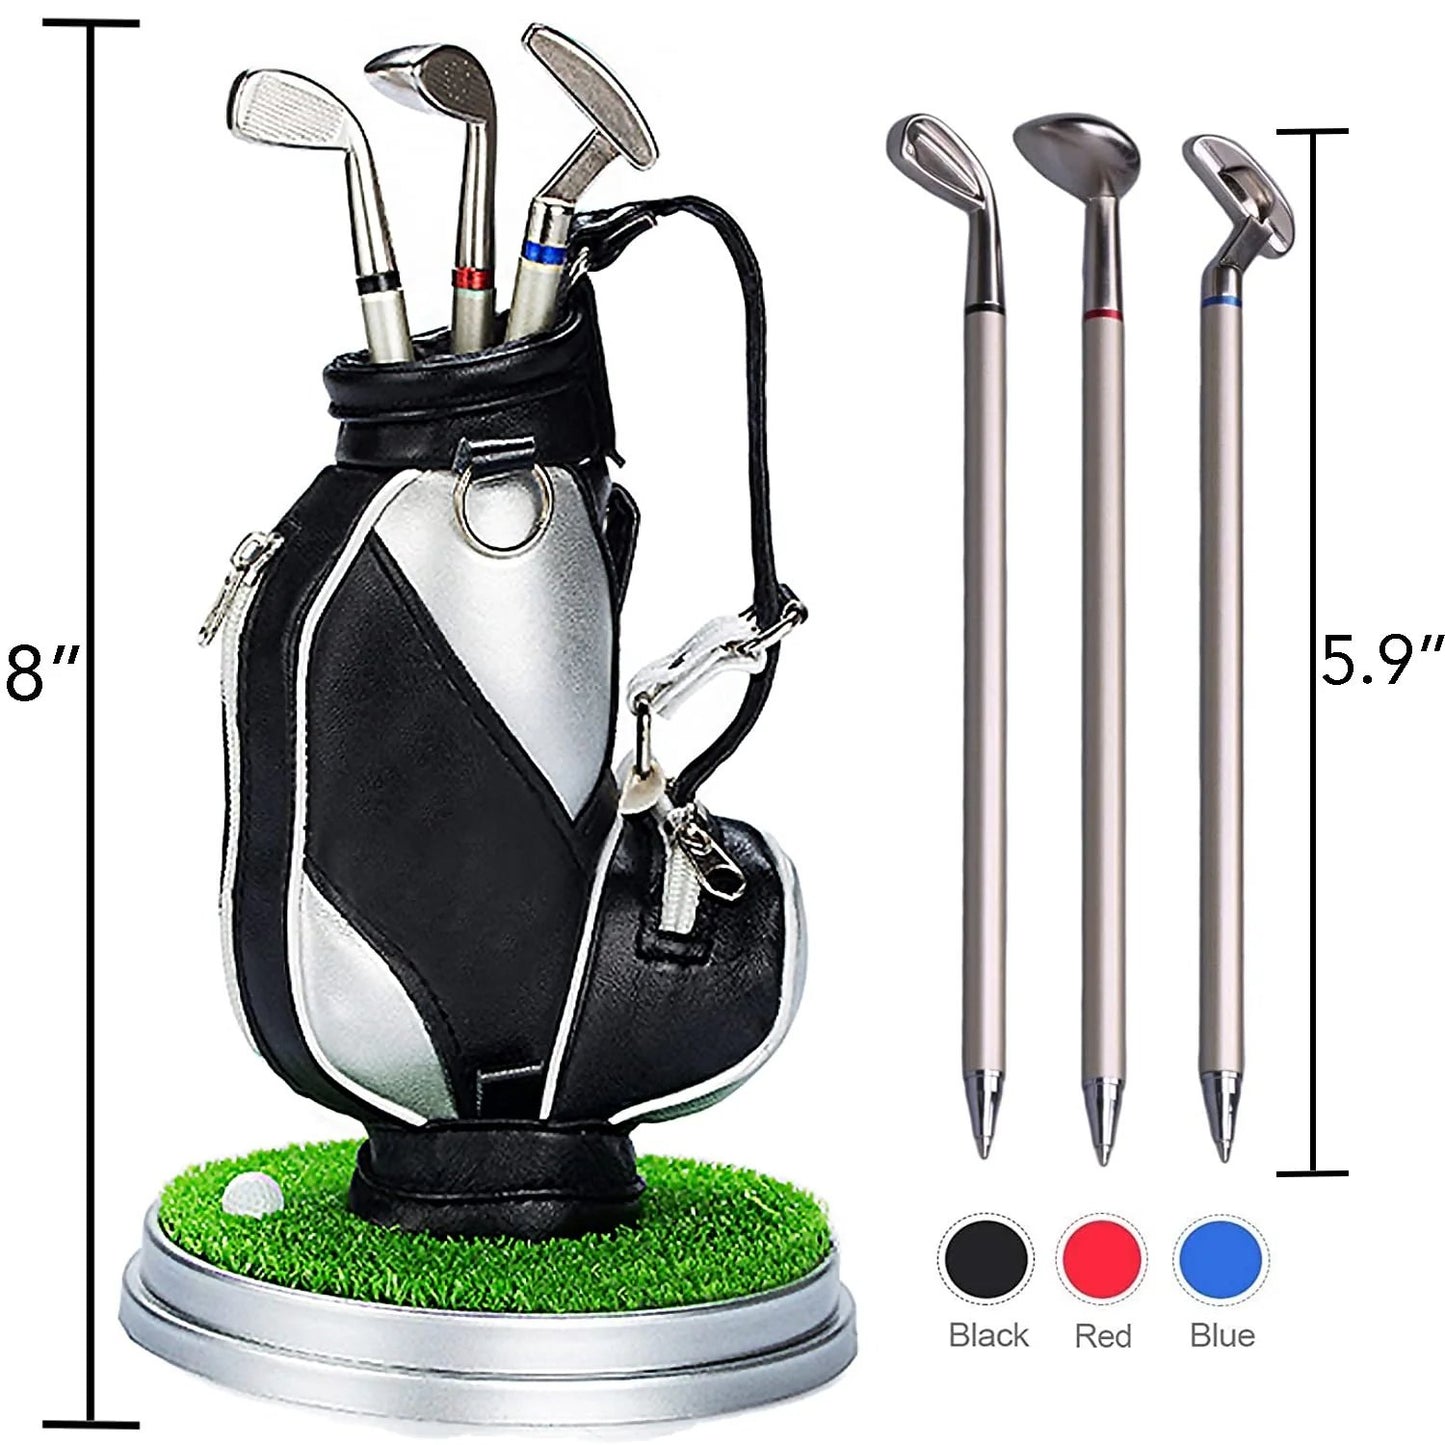 Mini Golf Pens Holder with Pen(Factory direct sales, snapped up immediately)🔥🔥🔥